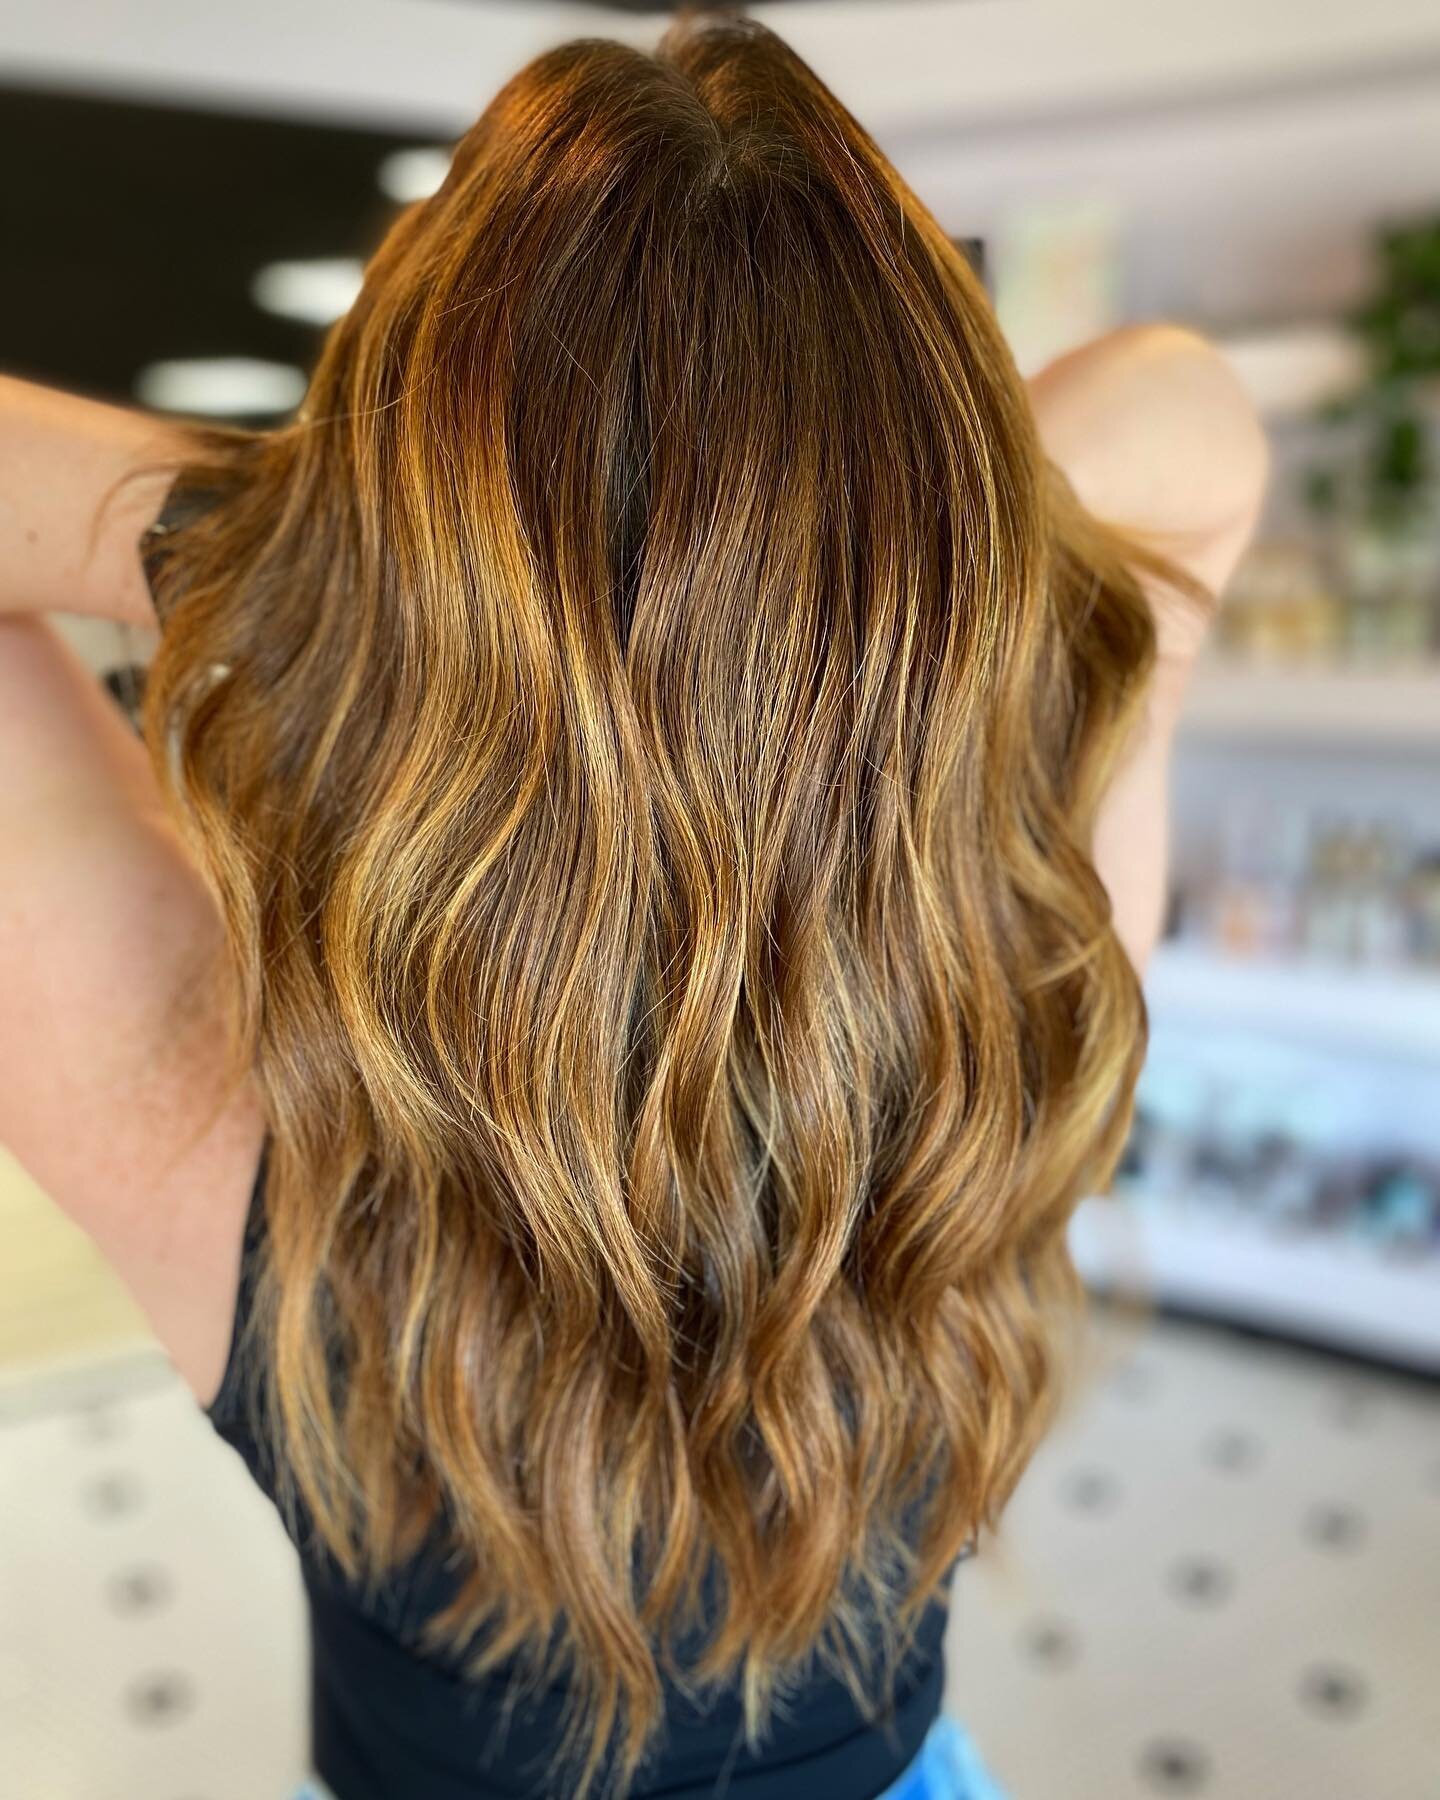 Session one for @alexprismhair getting her ends just a bit blonder 💛 We&rsquo;ll do a few balayage sessions about a month apart to build dimension and she gonna ✨glow✨

#reallifehair #susannahcrafthair #prismhairrva #prismglowup #rvacolorspecialist 